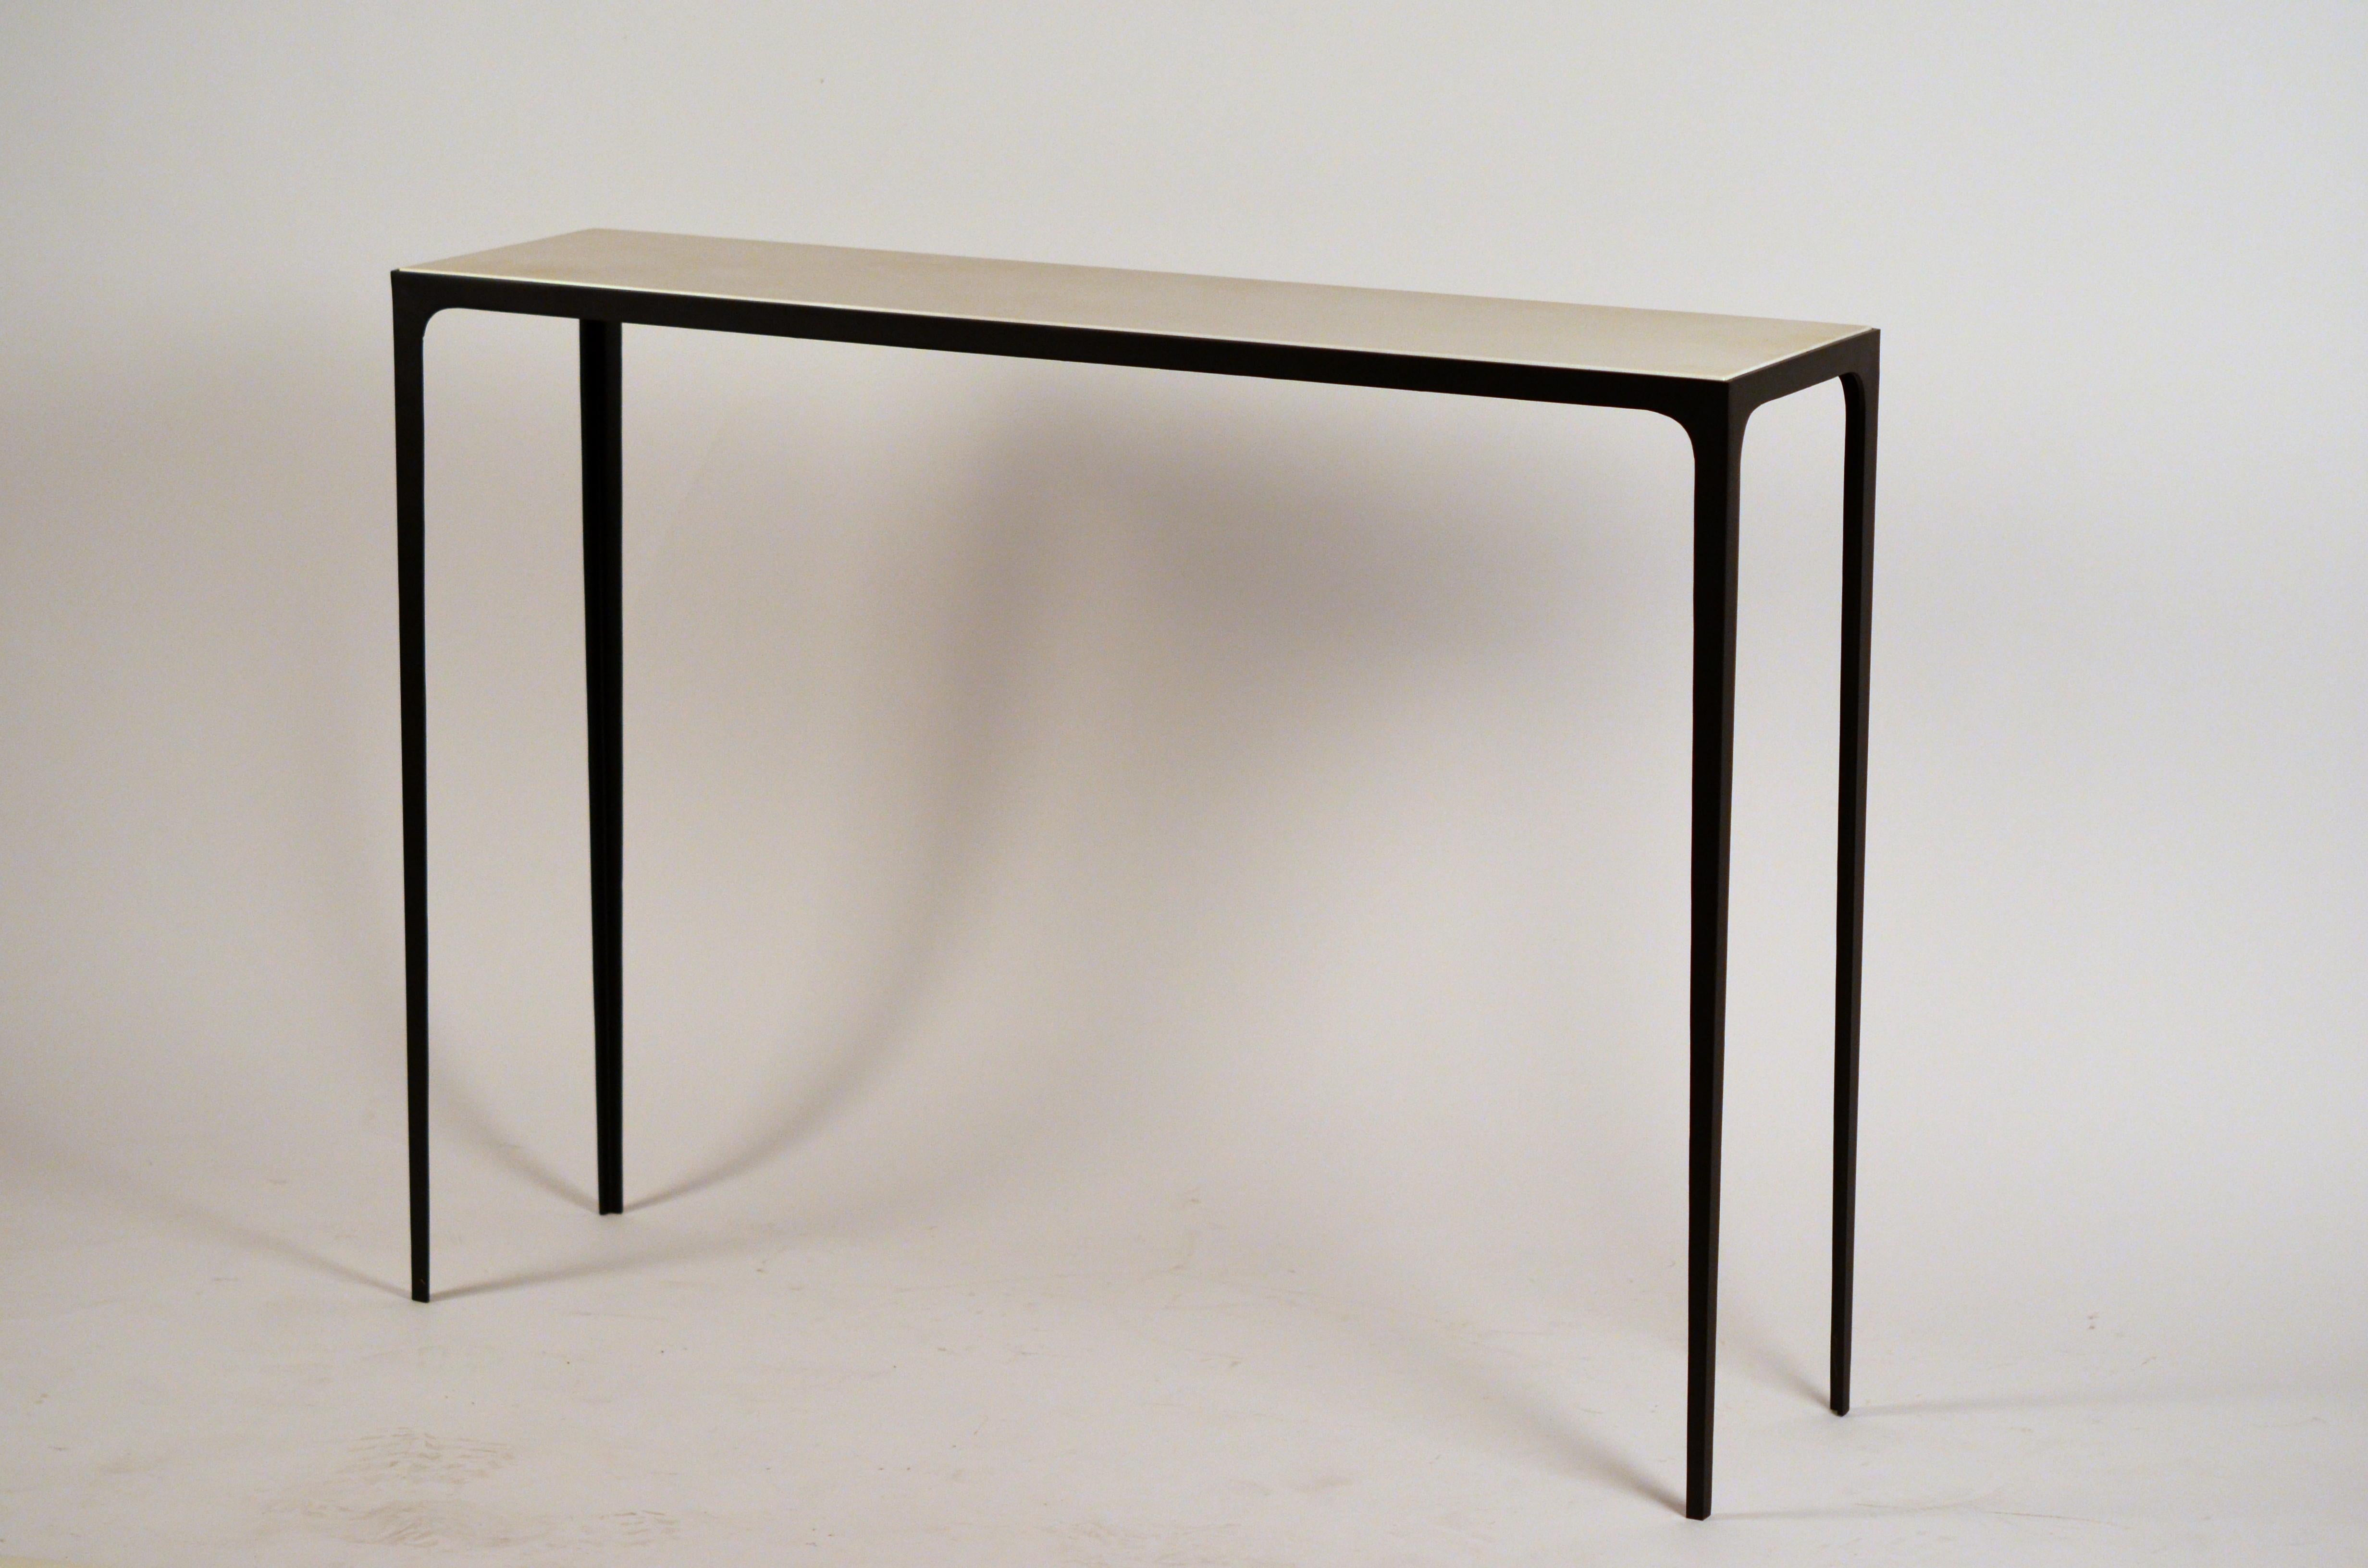 Long 'Esquisse' wrought iron and cream parchment console by Design Frères.

Chic handmade natural parchment top paired with a slender blackened wrought iron base.

Pair available.